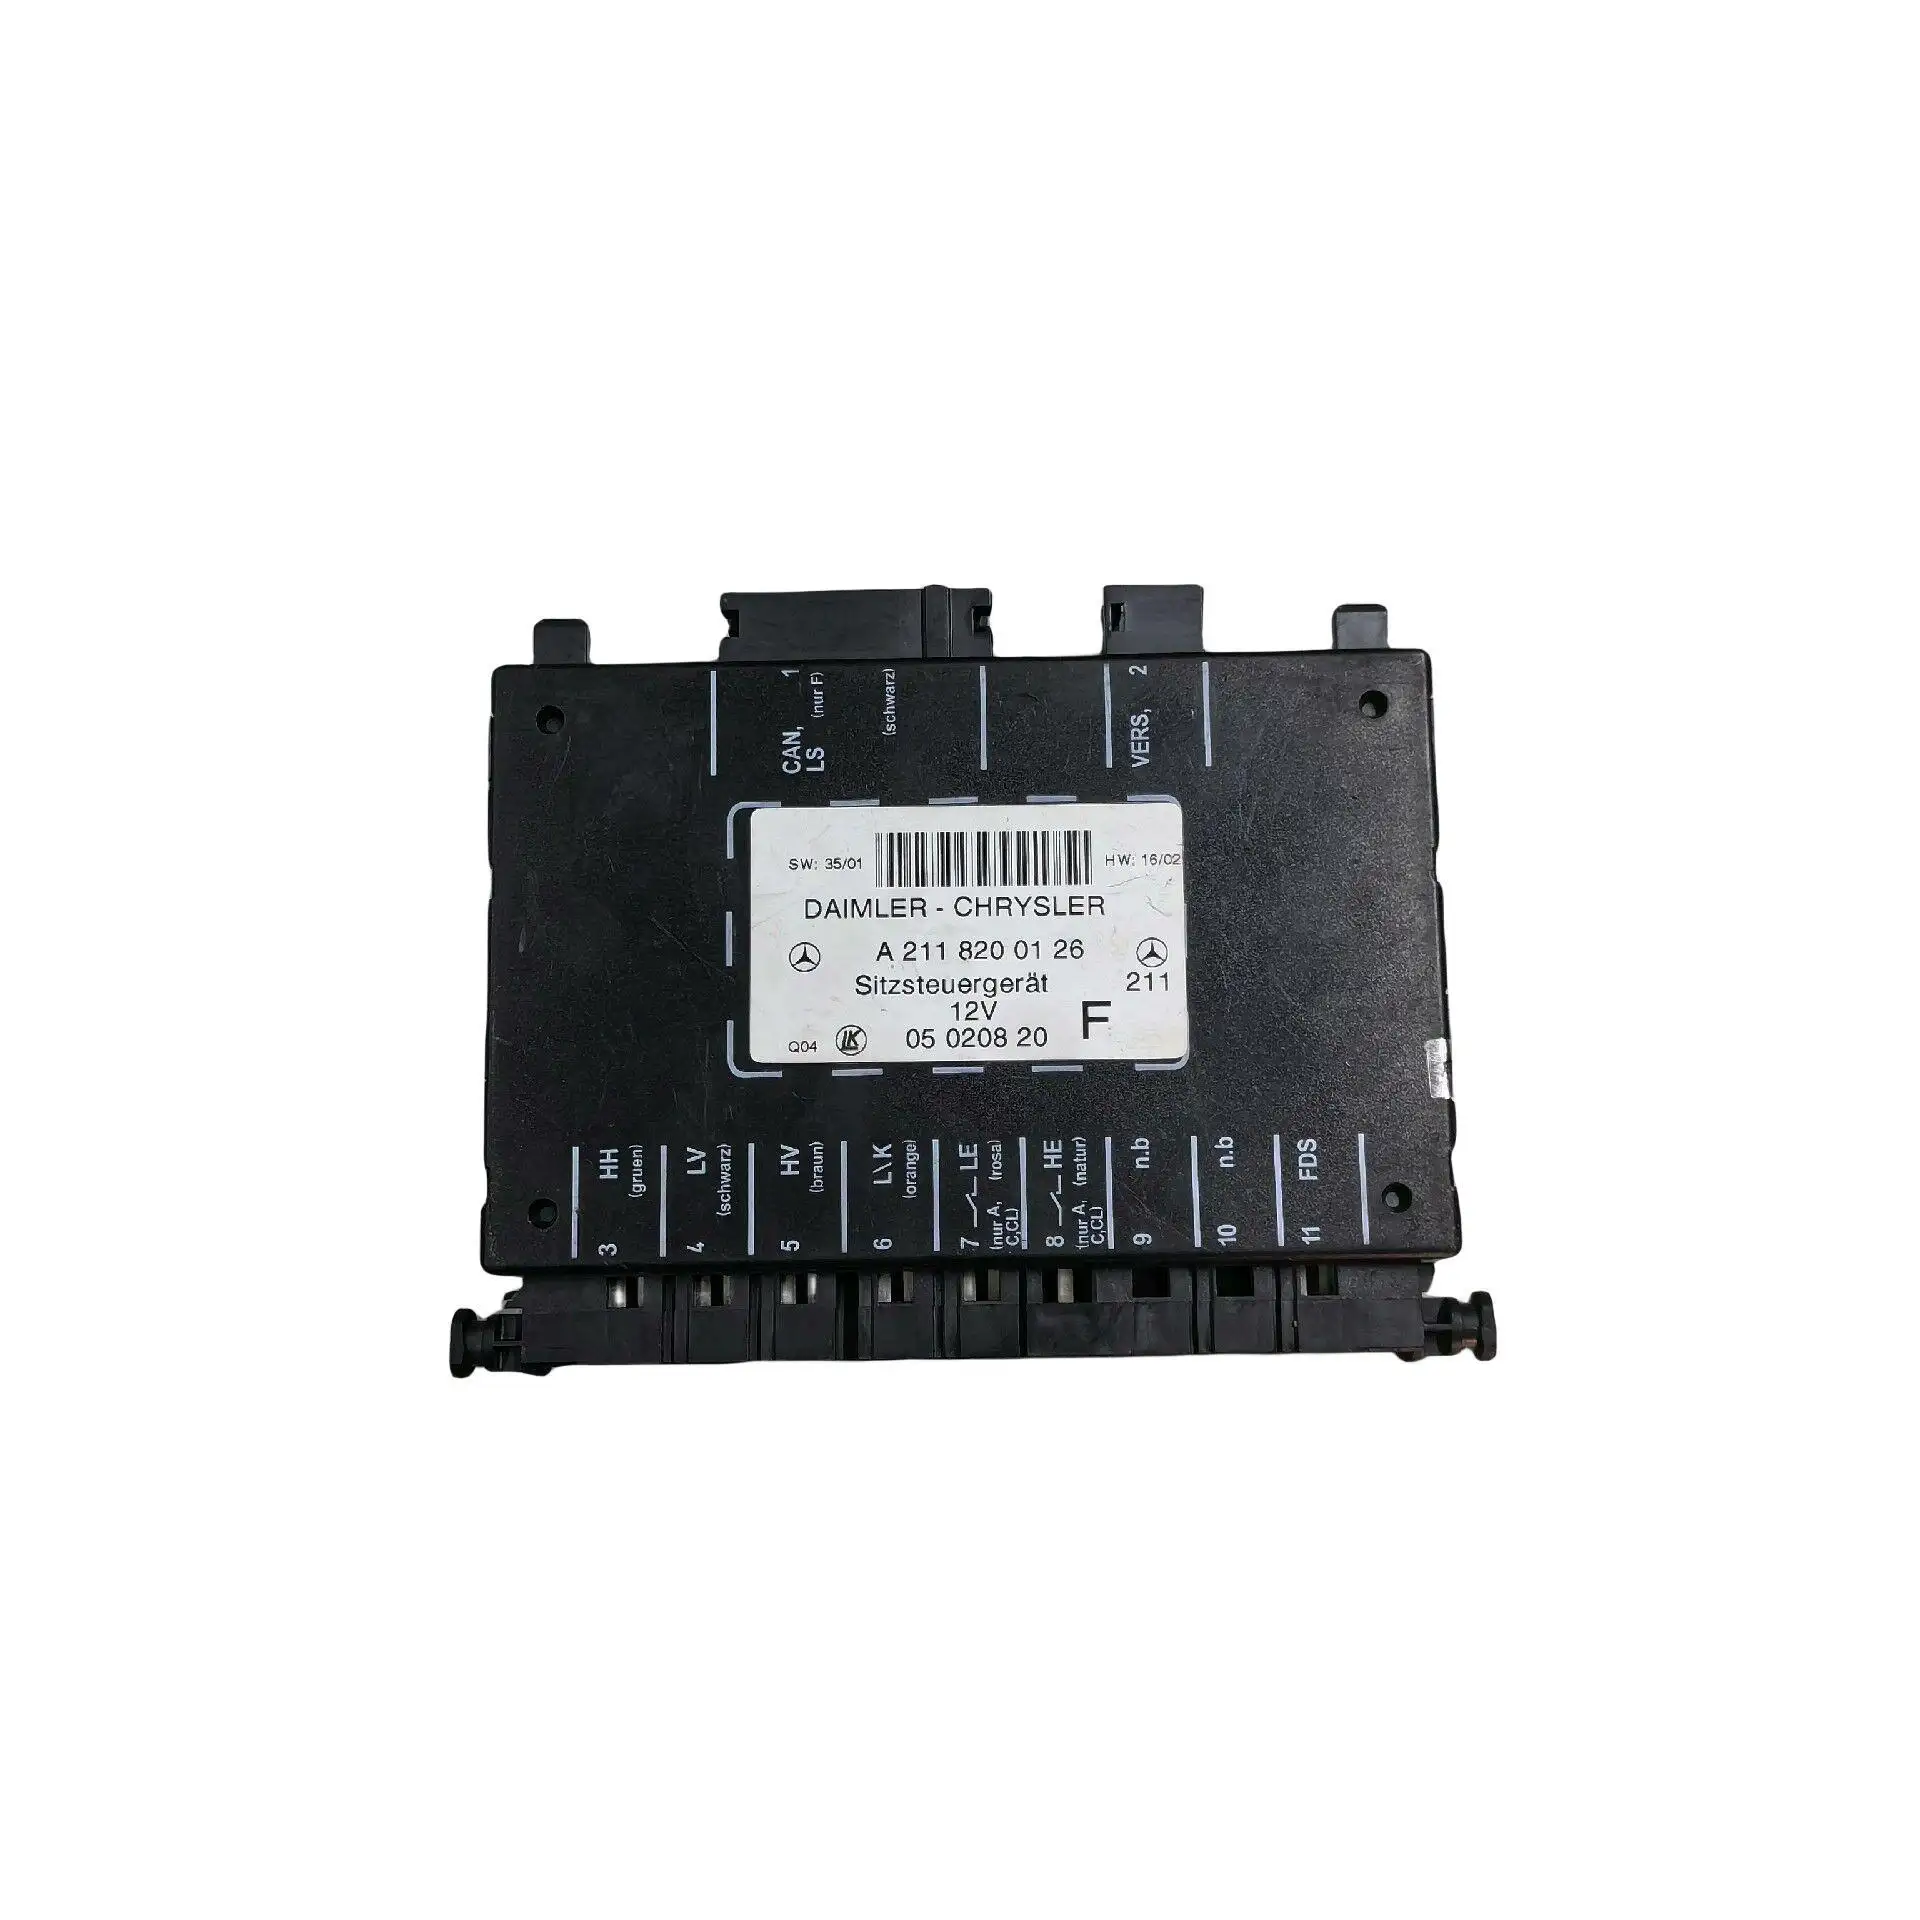 A2118704626 Yao Pei left front seat power control module suitable for CLK W209